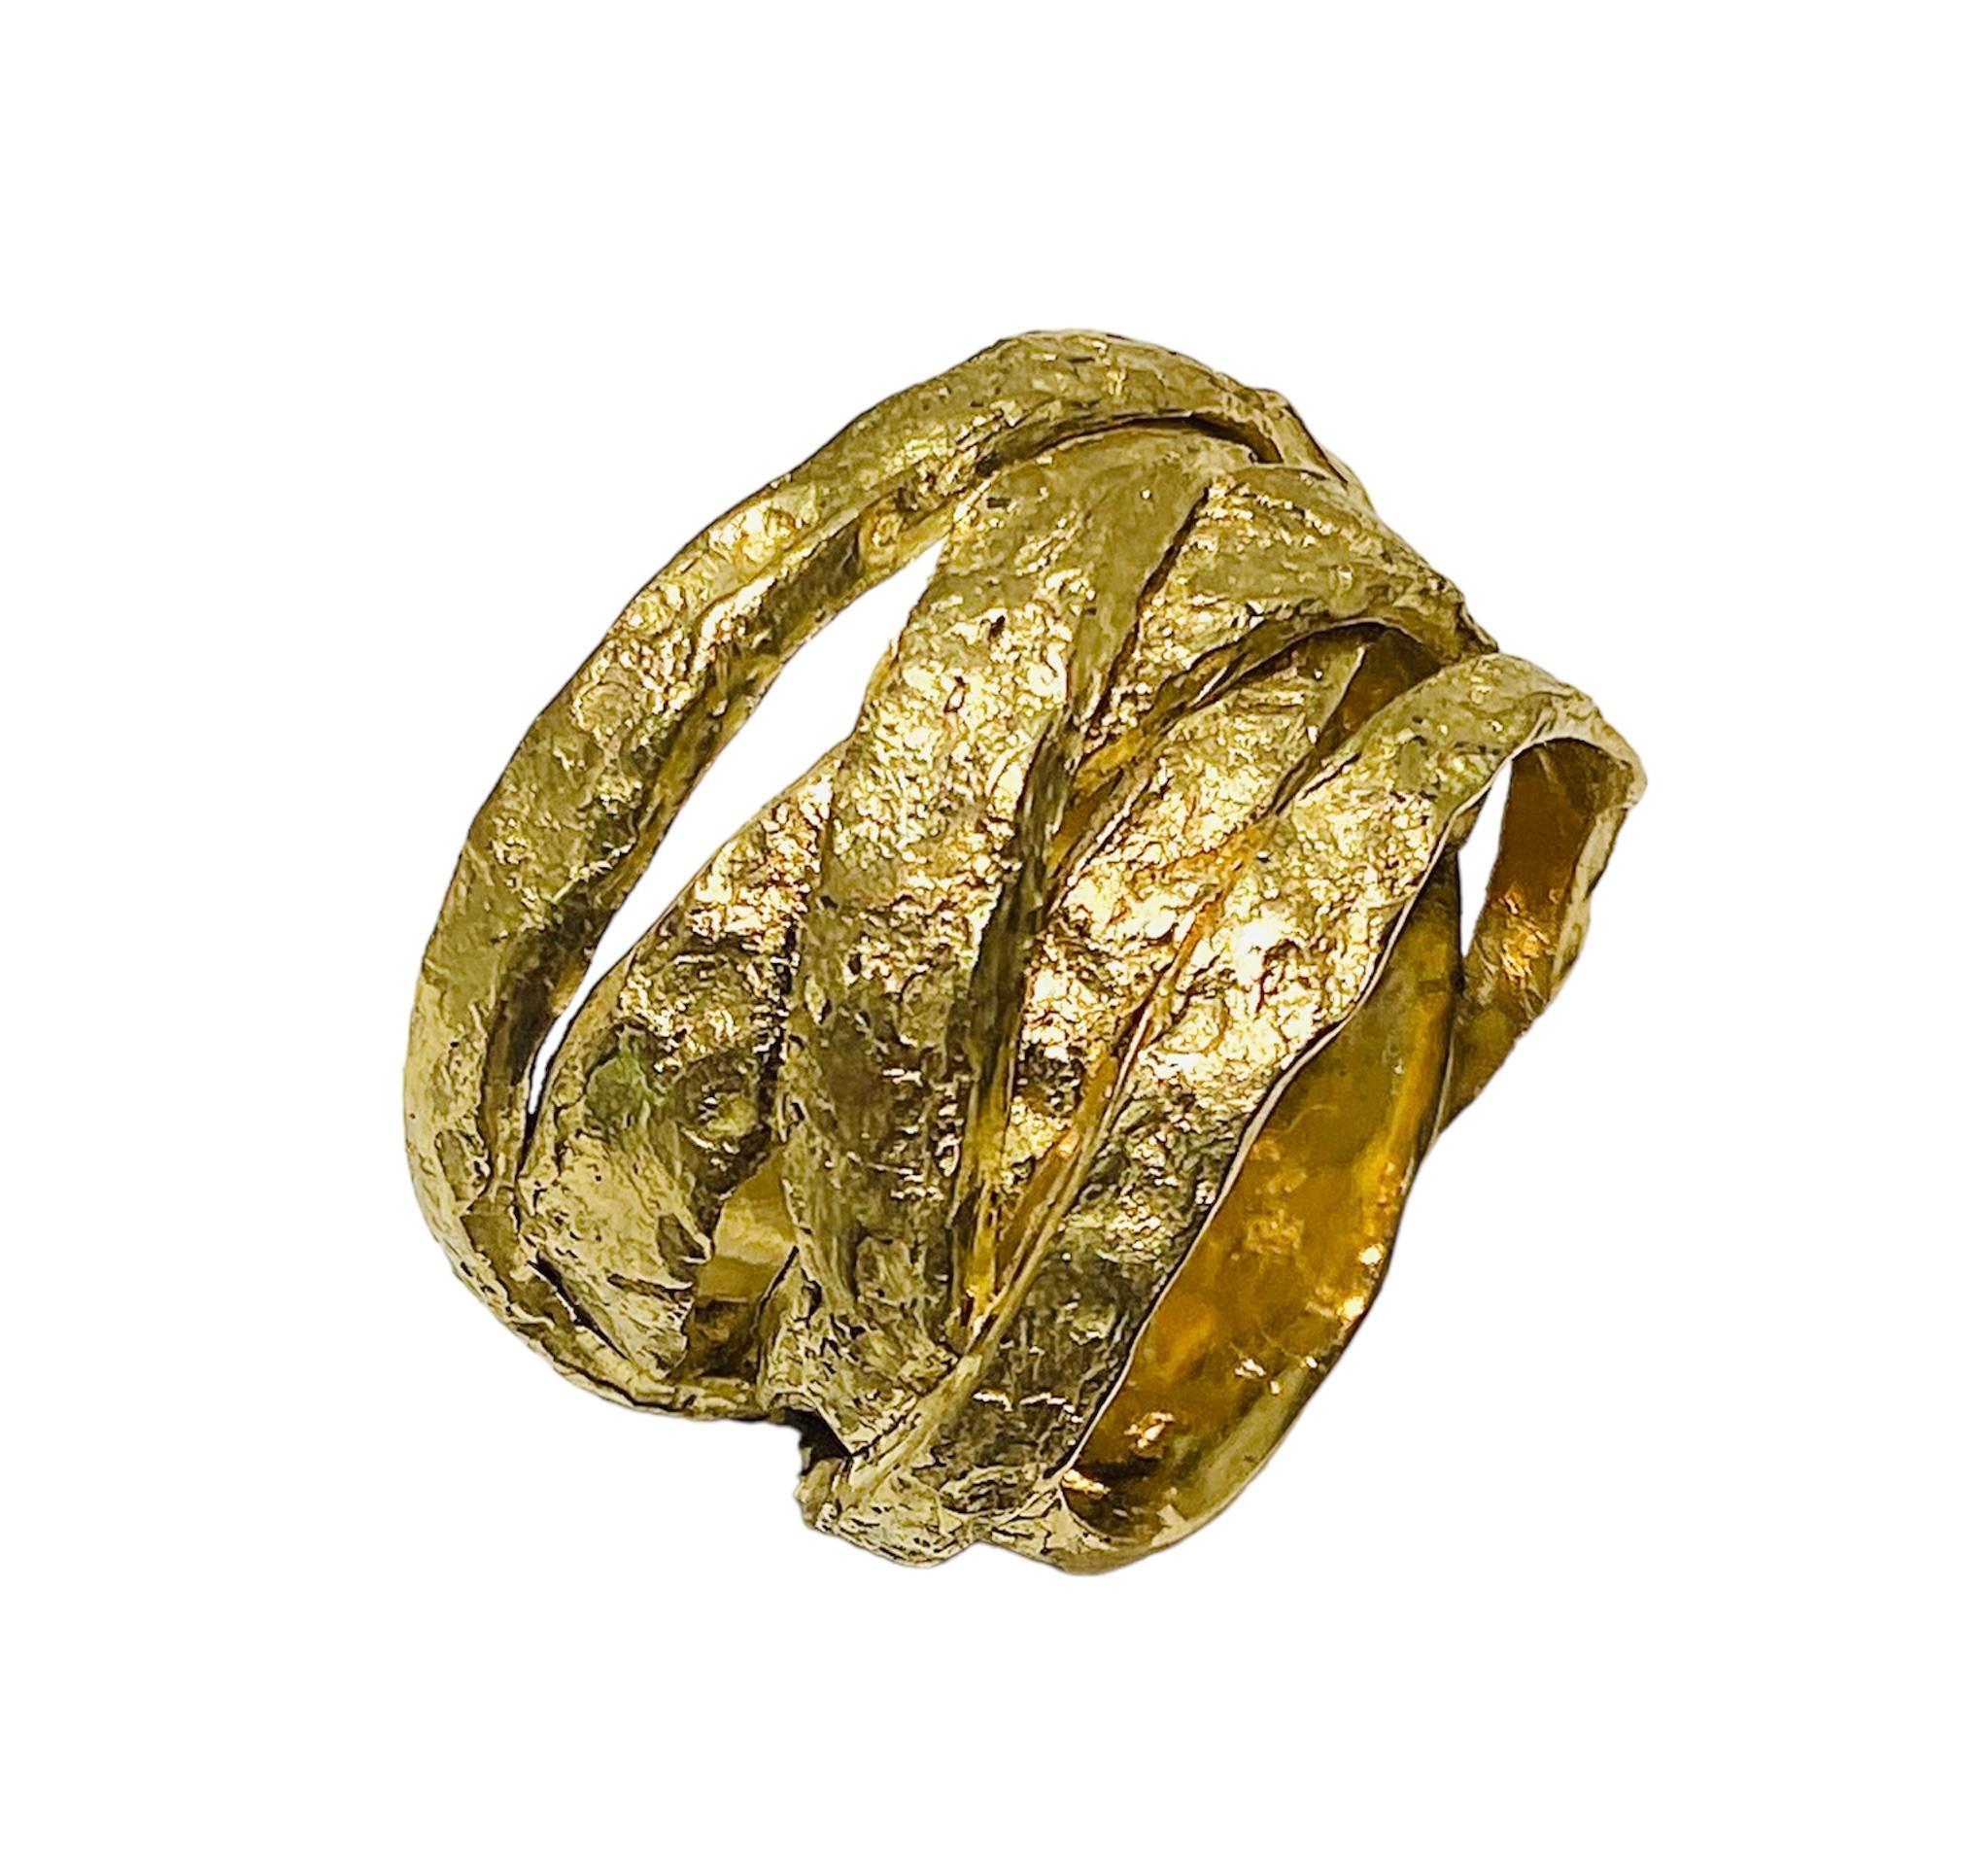 Beautiful One of a kind textured ring, made with lost wax technic. Rich colour of yellow gold and  texture reminiscent of ancient Byzantine jewelry.
